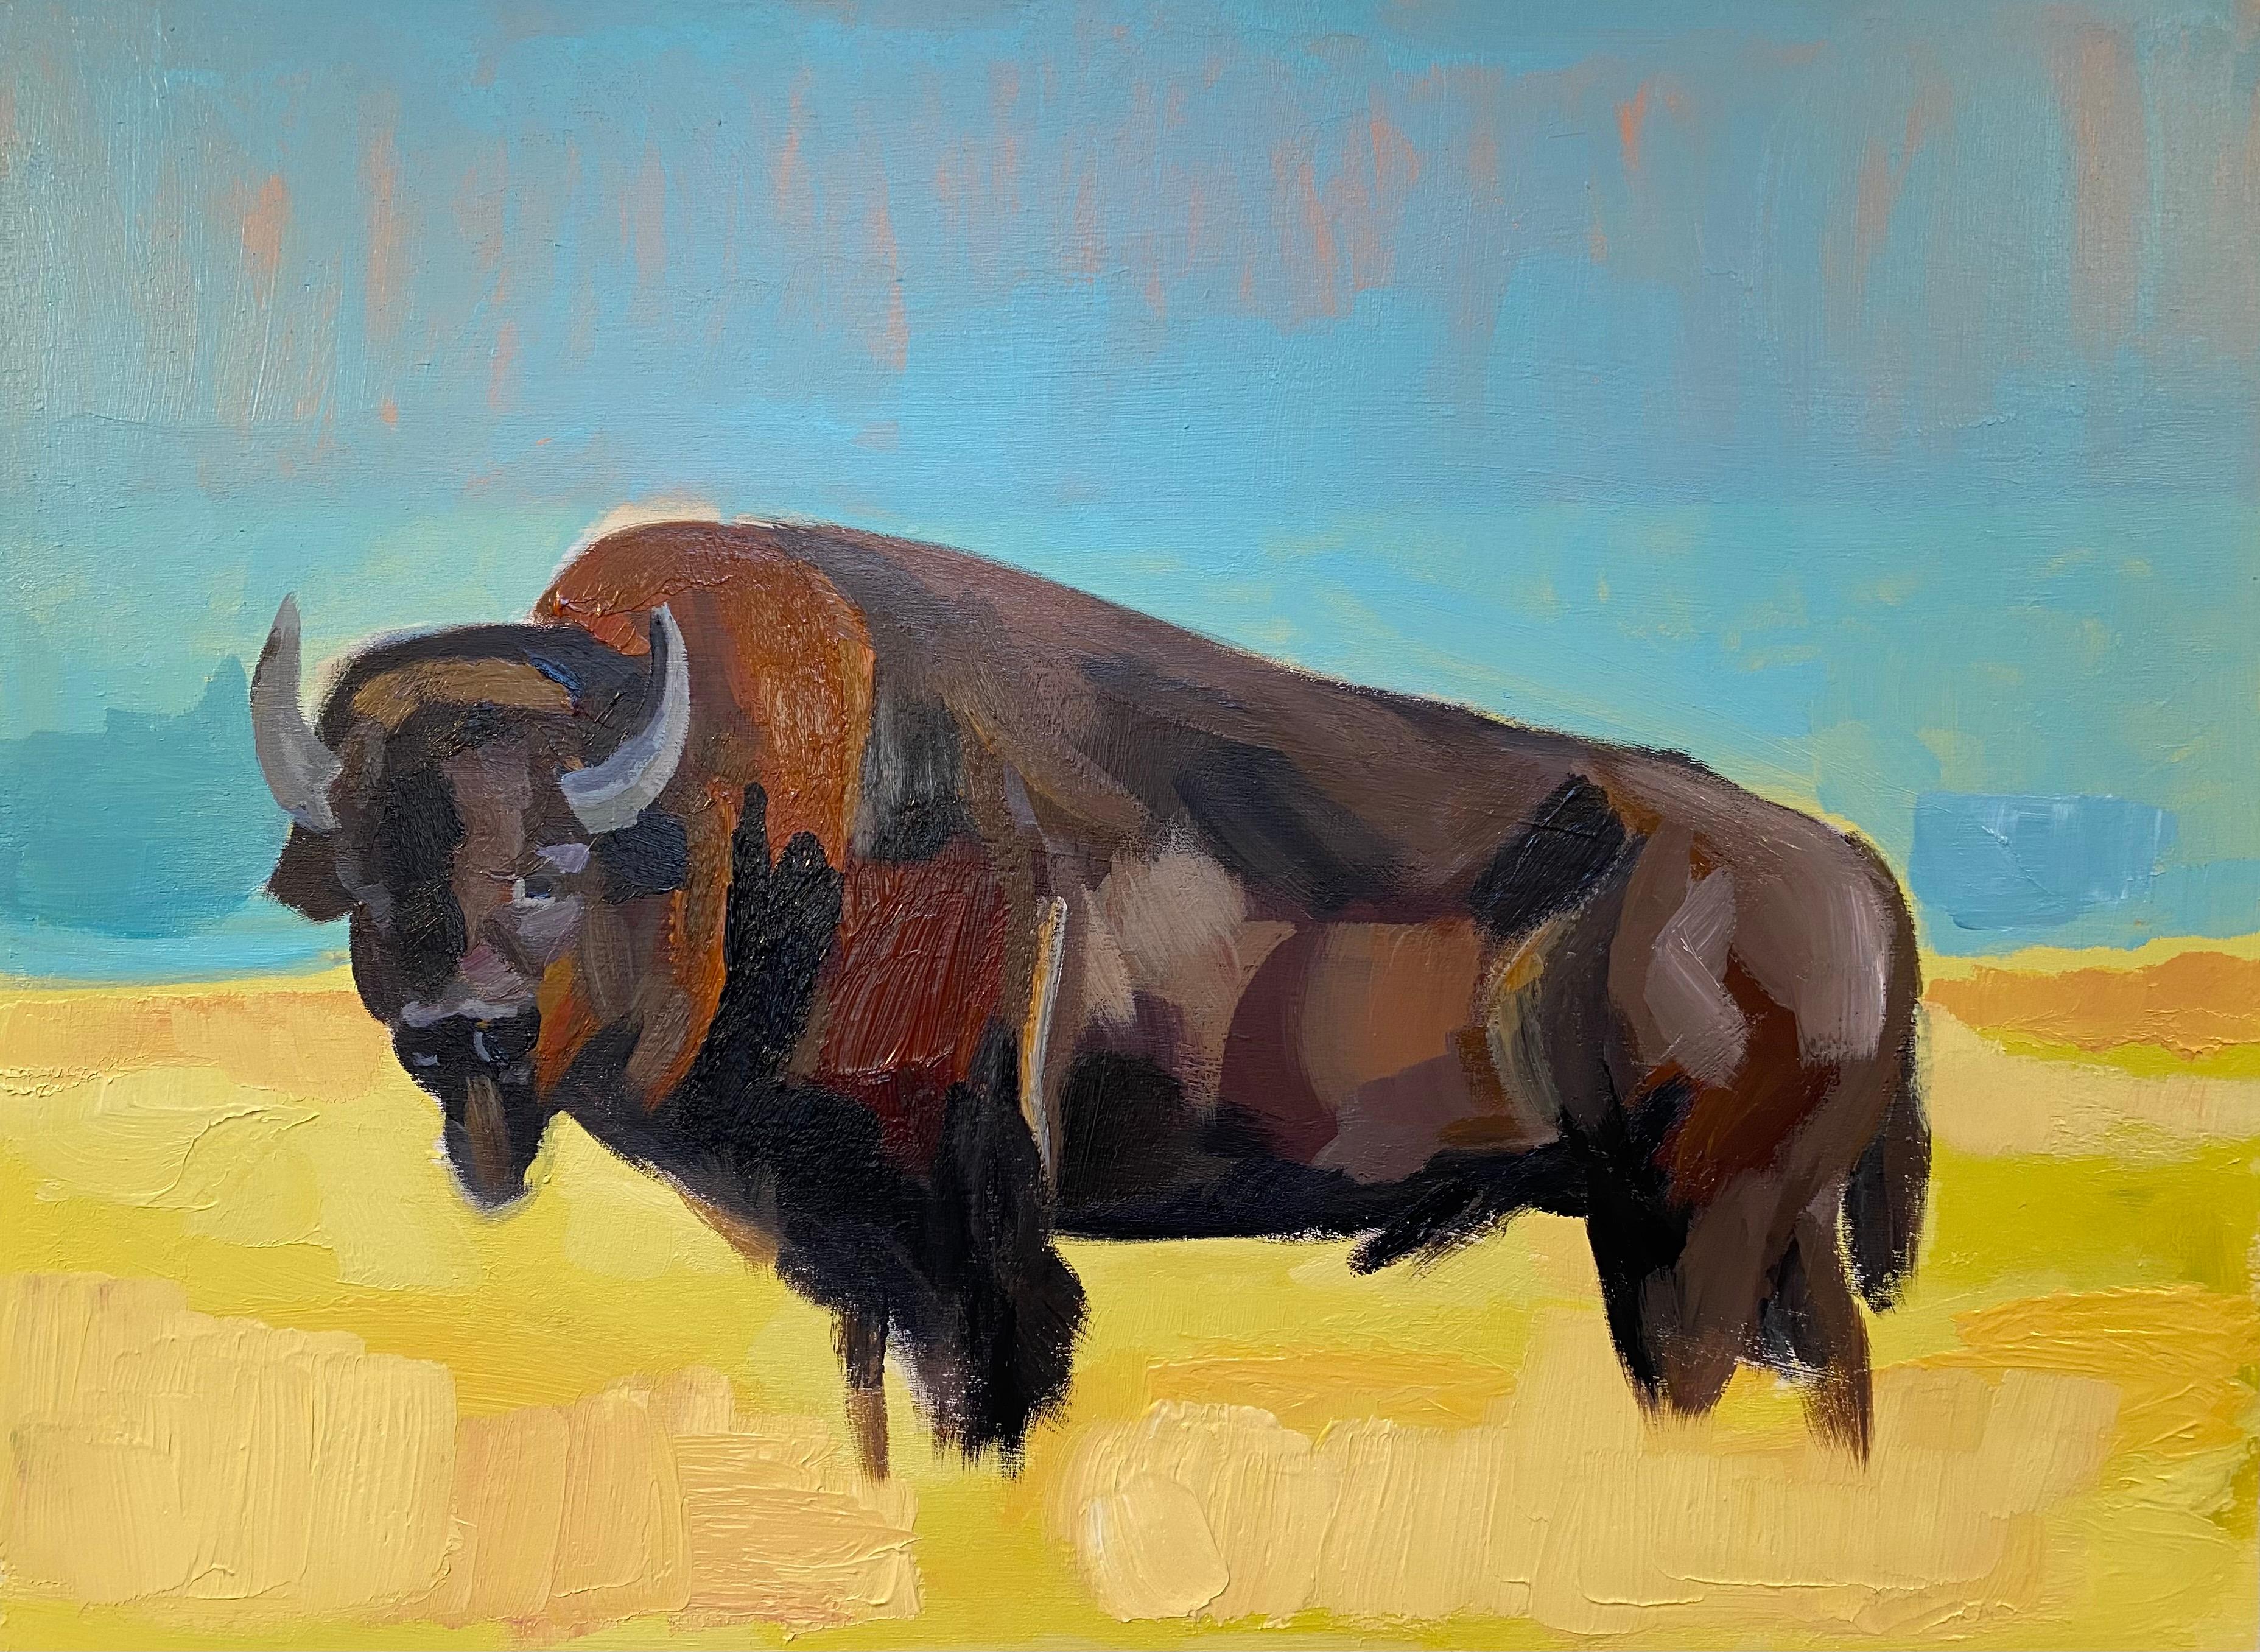 Bison 2 - Painting by Lisa Bostwick